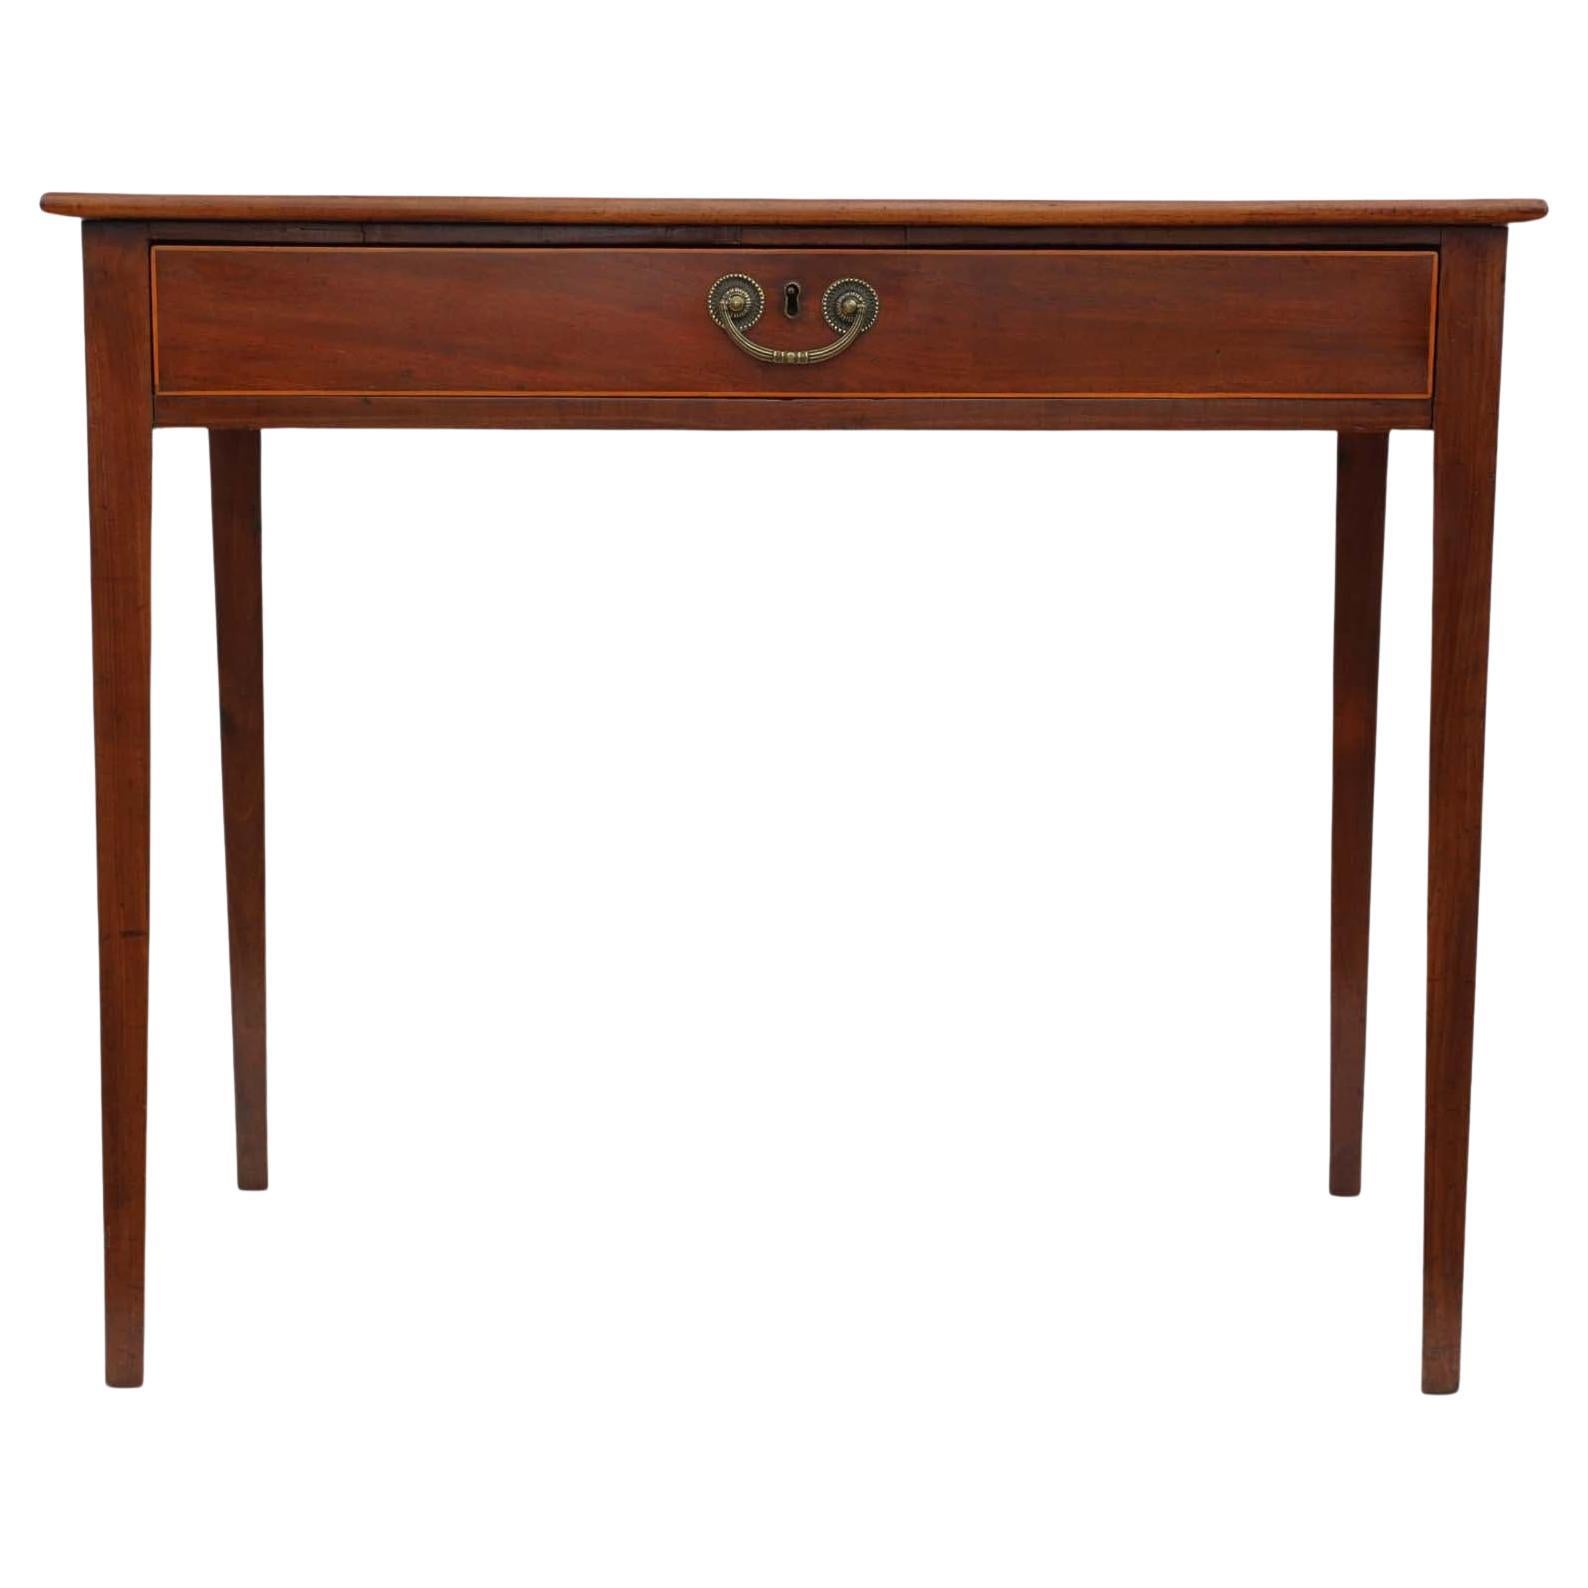 Antique Fine Quality C1800 Inlaid Mahogany Writing table - Desk Side Dressing For Sale